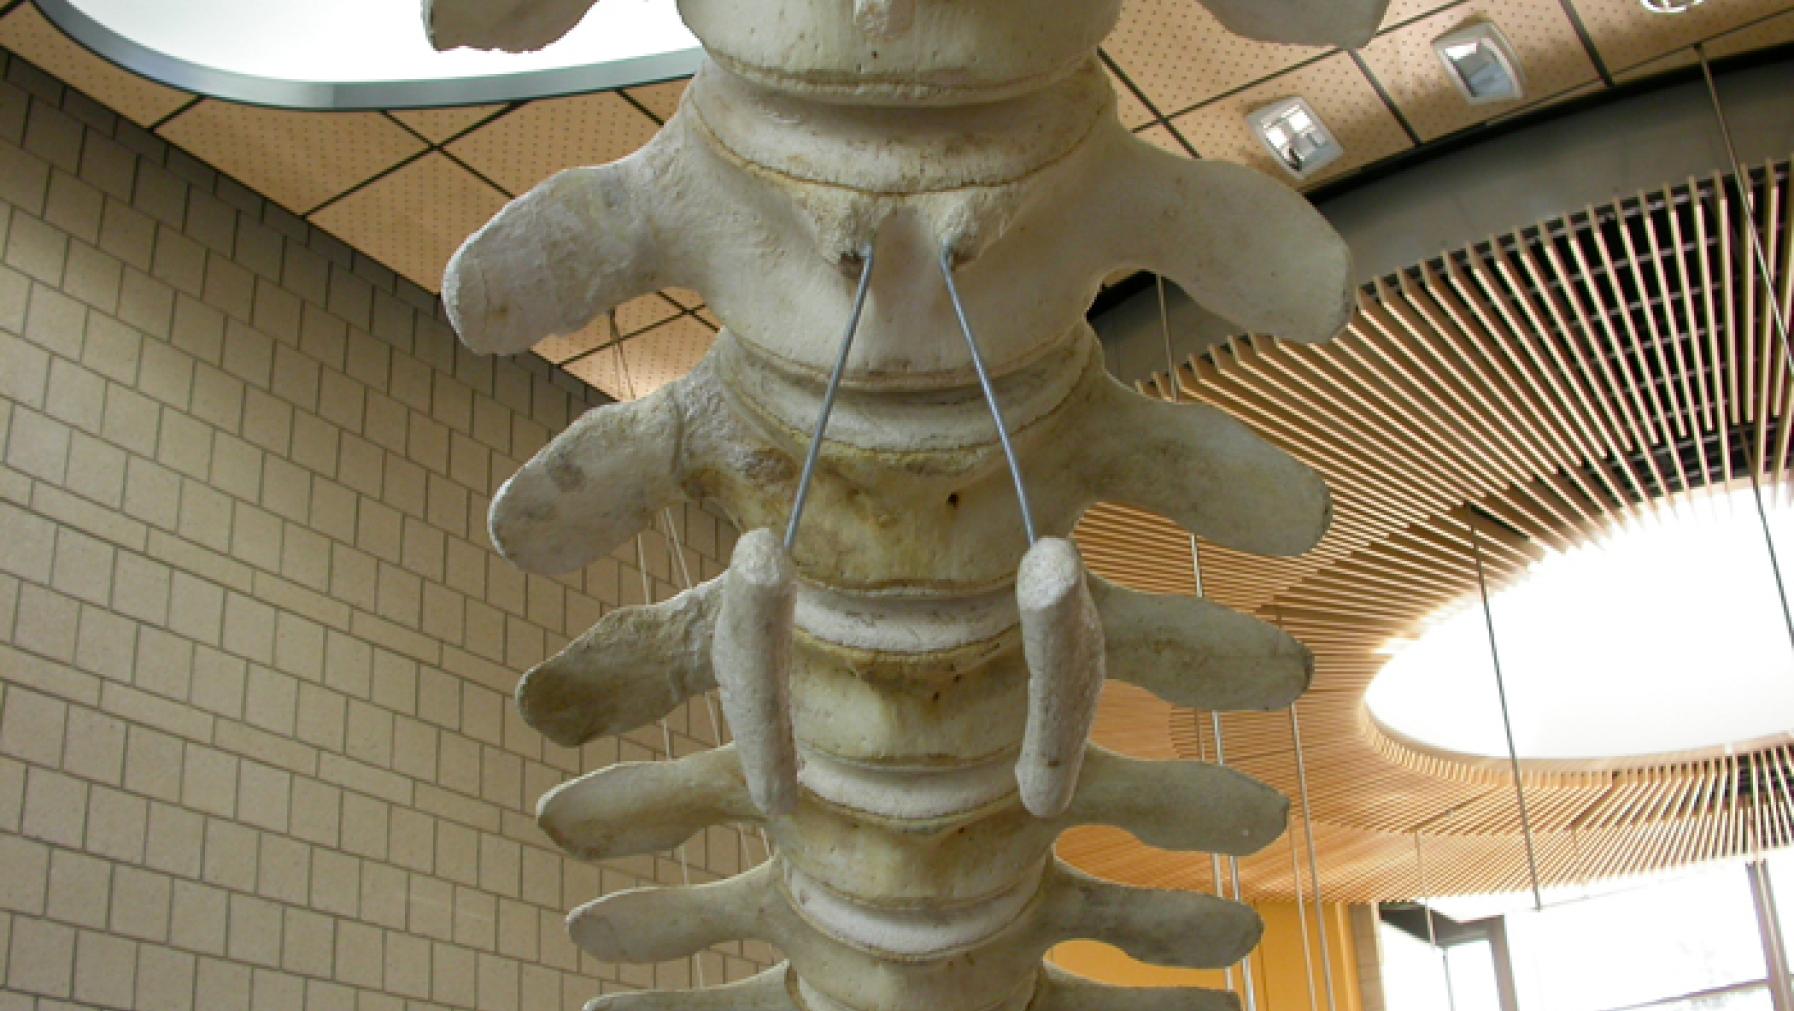 The pelvic girdle remnants held in place with threaded rods.